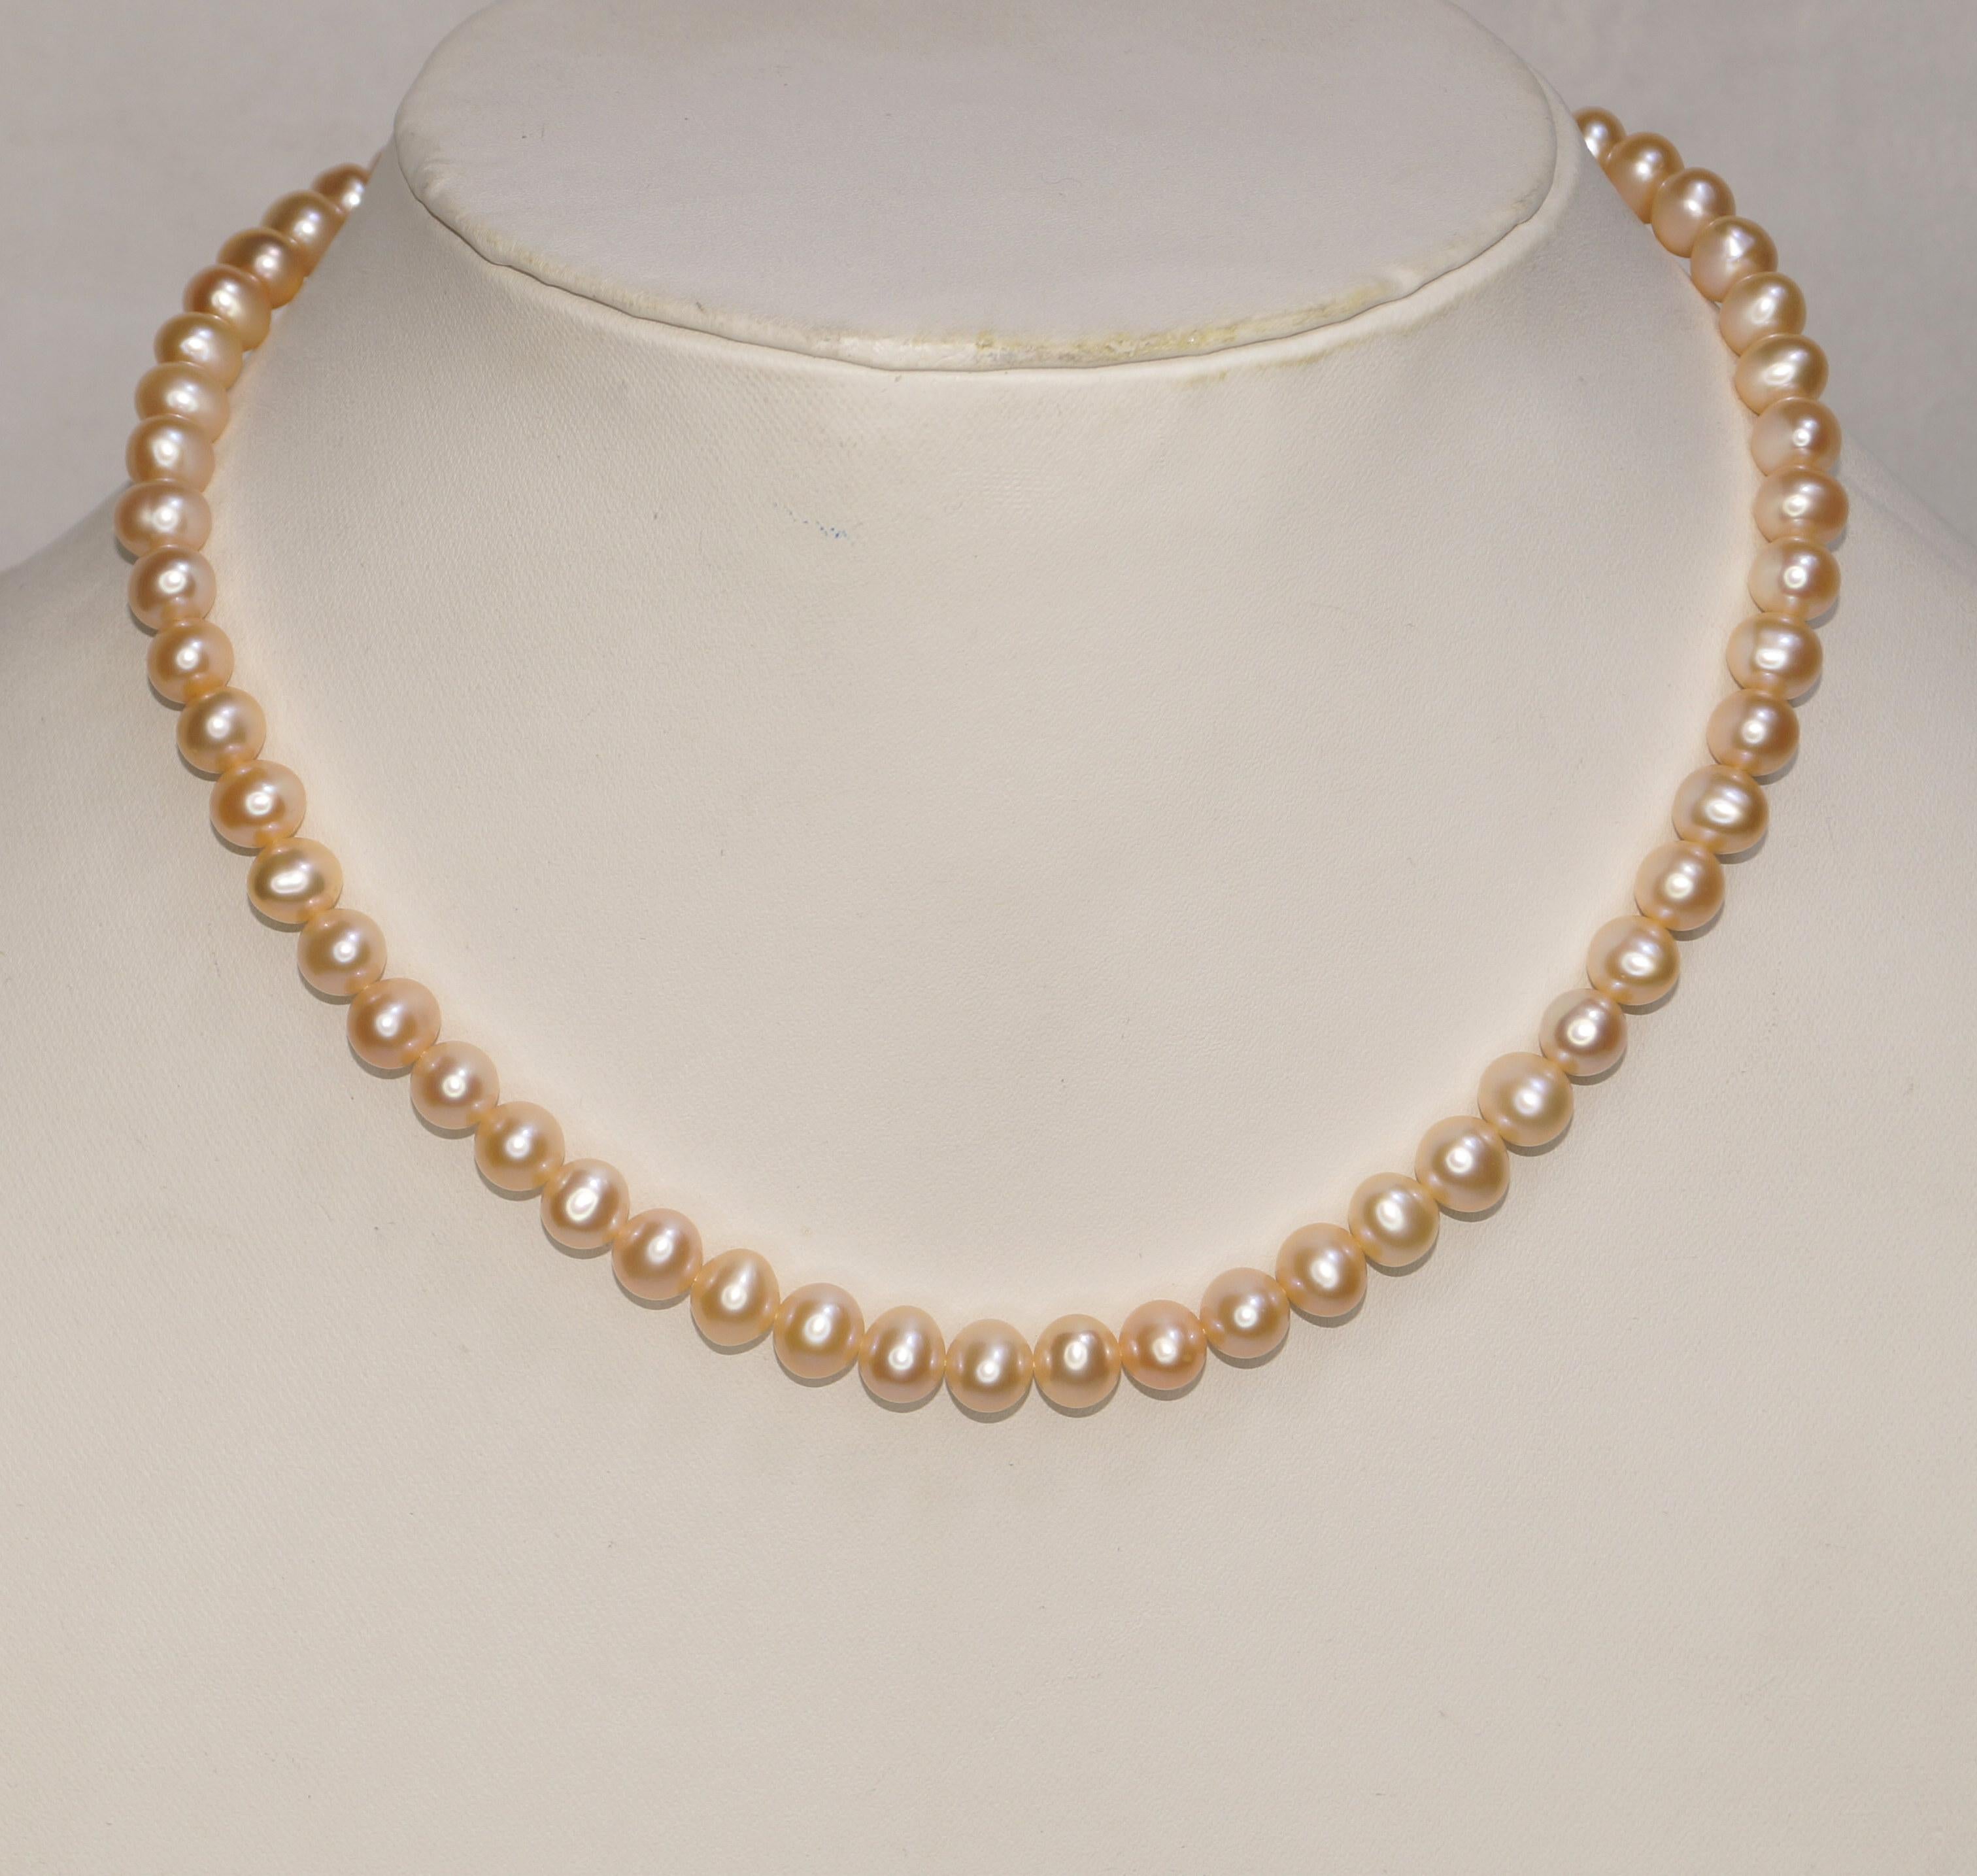 Details:
: 14k Yellow Gold Lock Freshwater pearl beads Necklace.

: Item no- KM32/1001/9837

:Pearl Size: 8mm (Approx.)

:Necklace length: 16